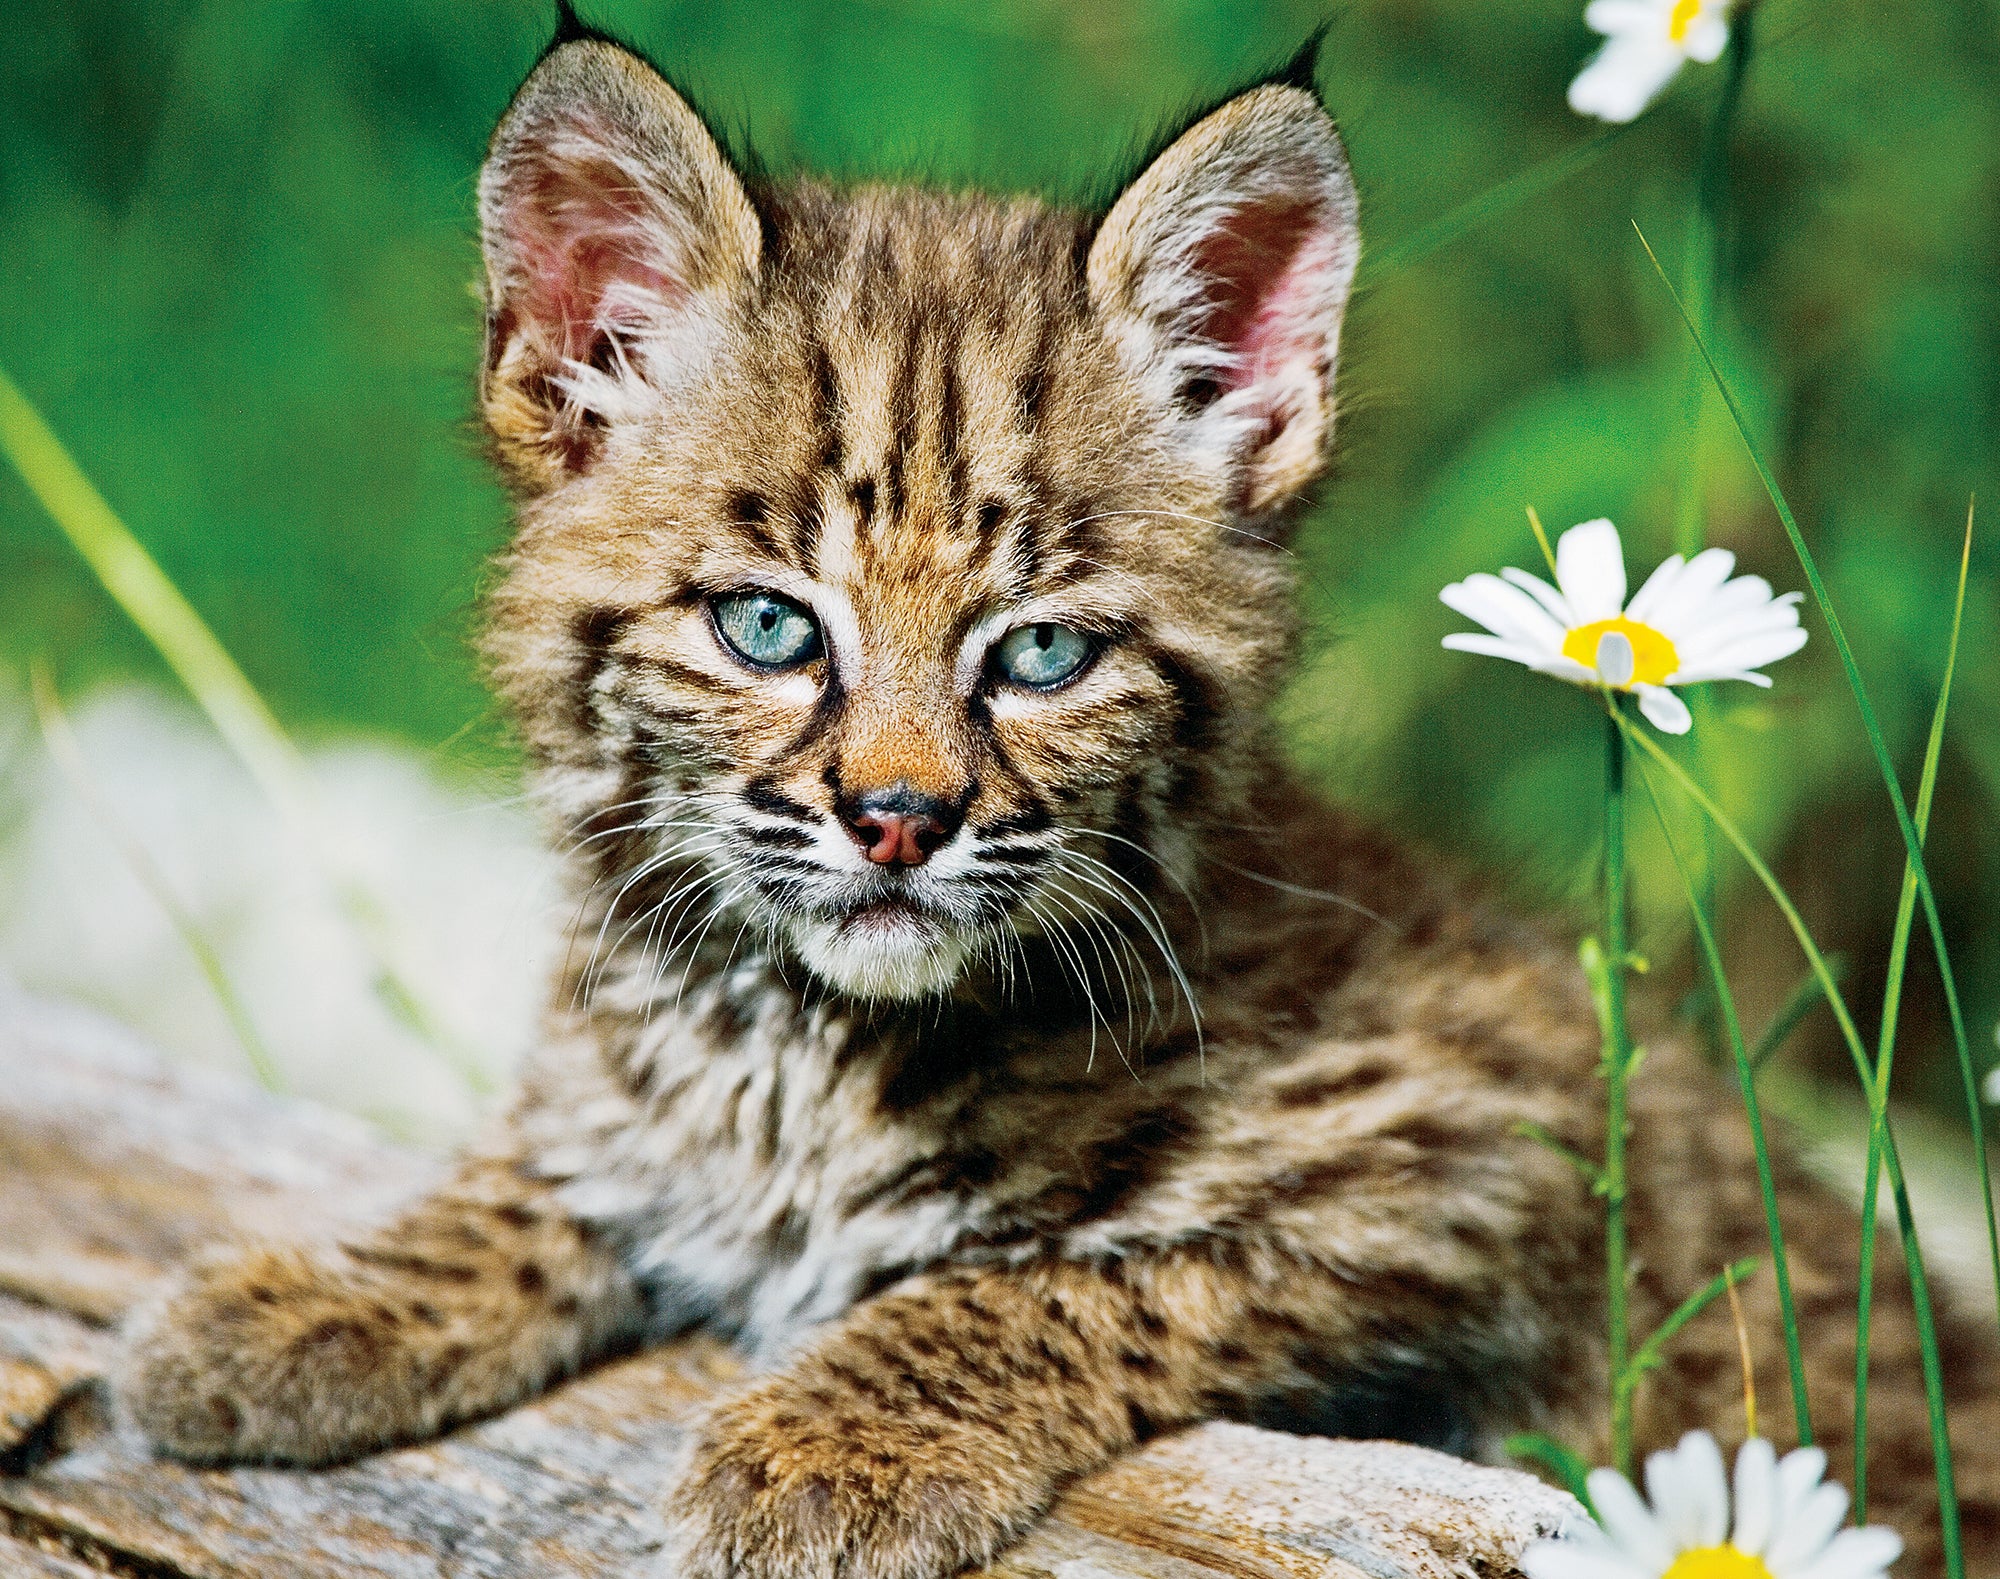 A bobcat kitten resting on logs, next to some flowers. End of image description.